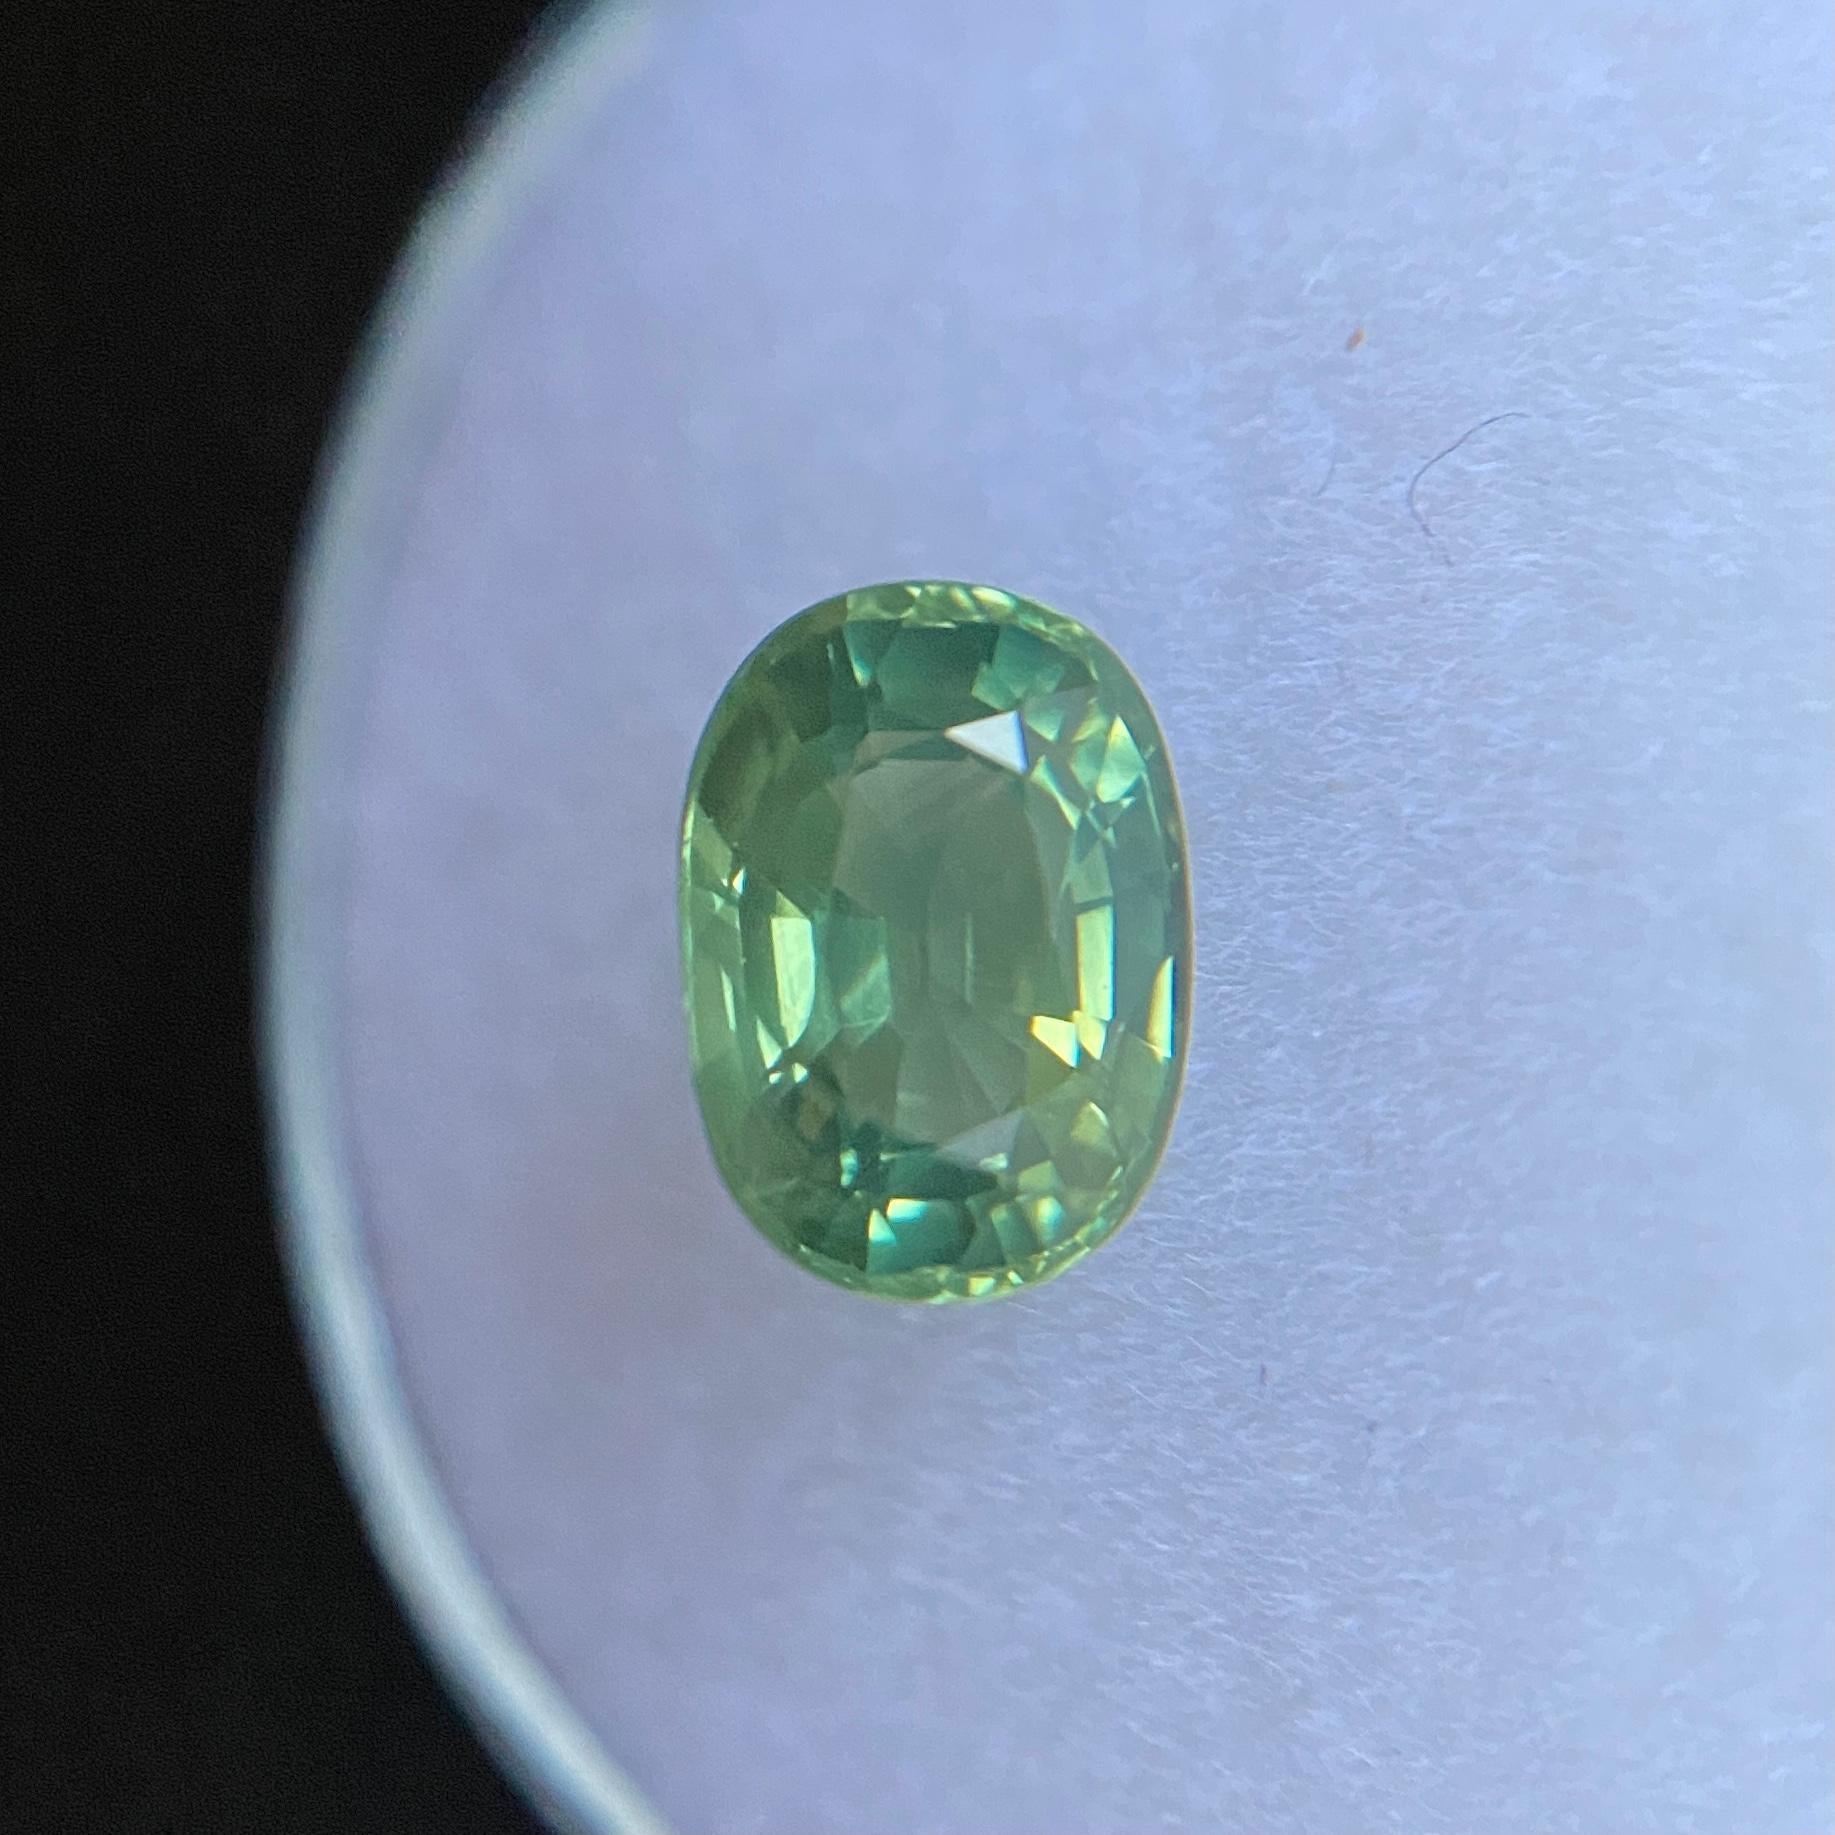 Natural Vivid Green Australian Sapphire Gemstone.

1.83 Carat with a beautiful vivid green colour and excellent clarity, very clean stone.

Also has an excellent oval cut and ideal polish to show great shine and colour, would look lovely in